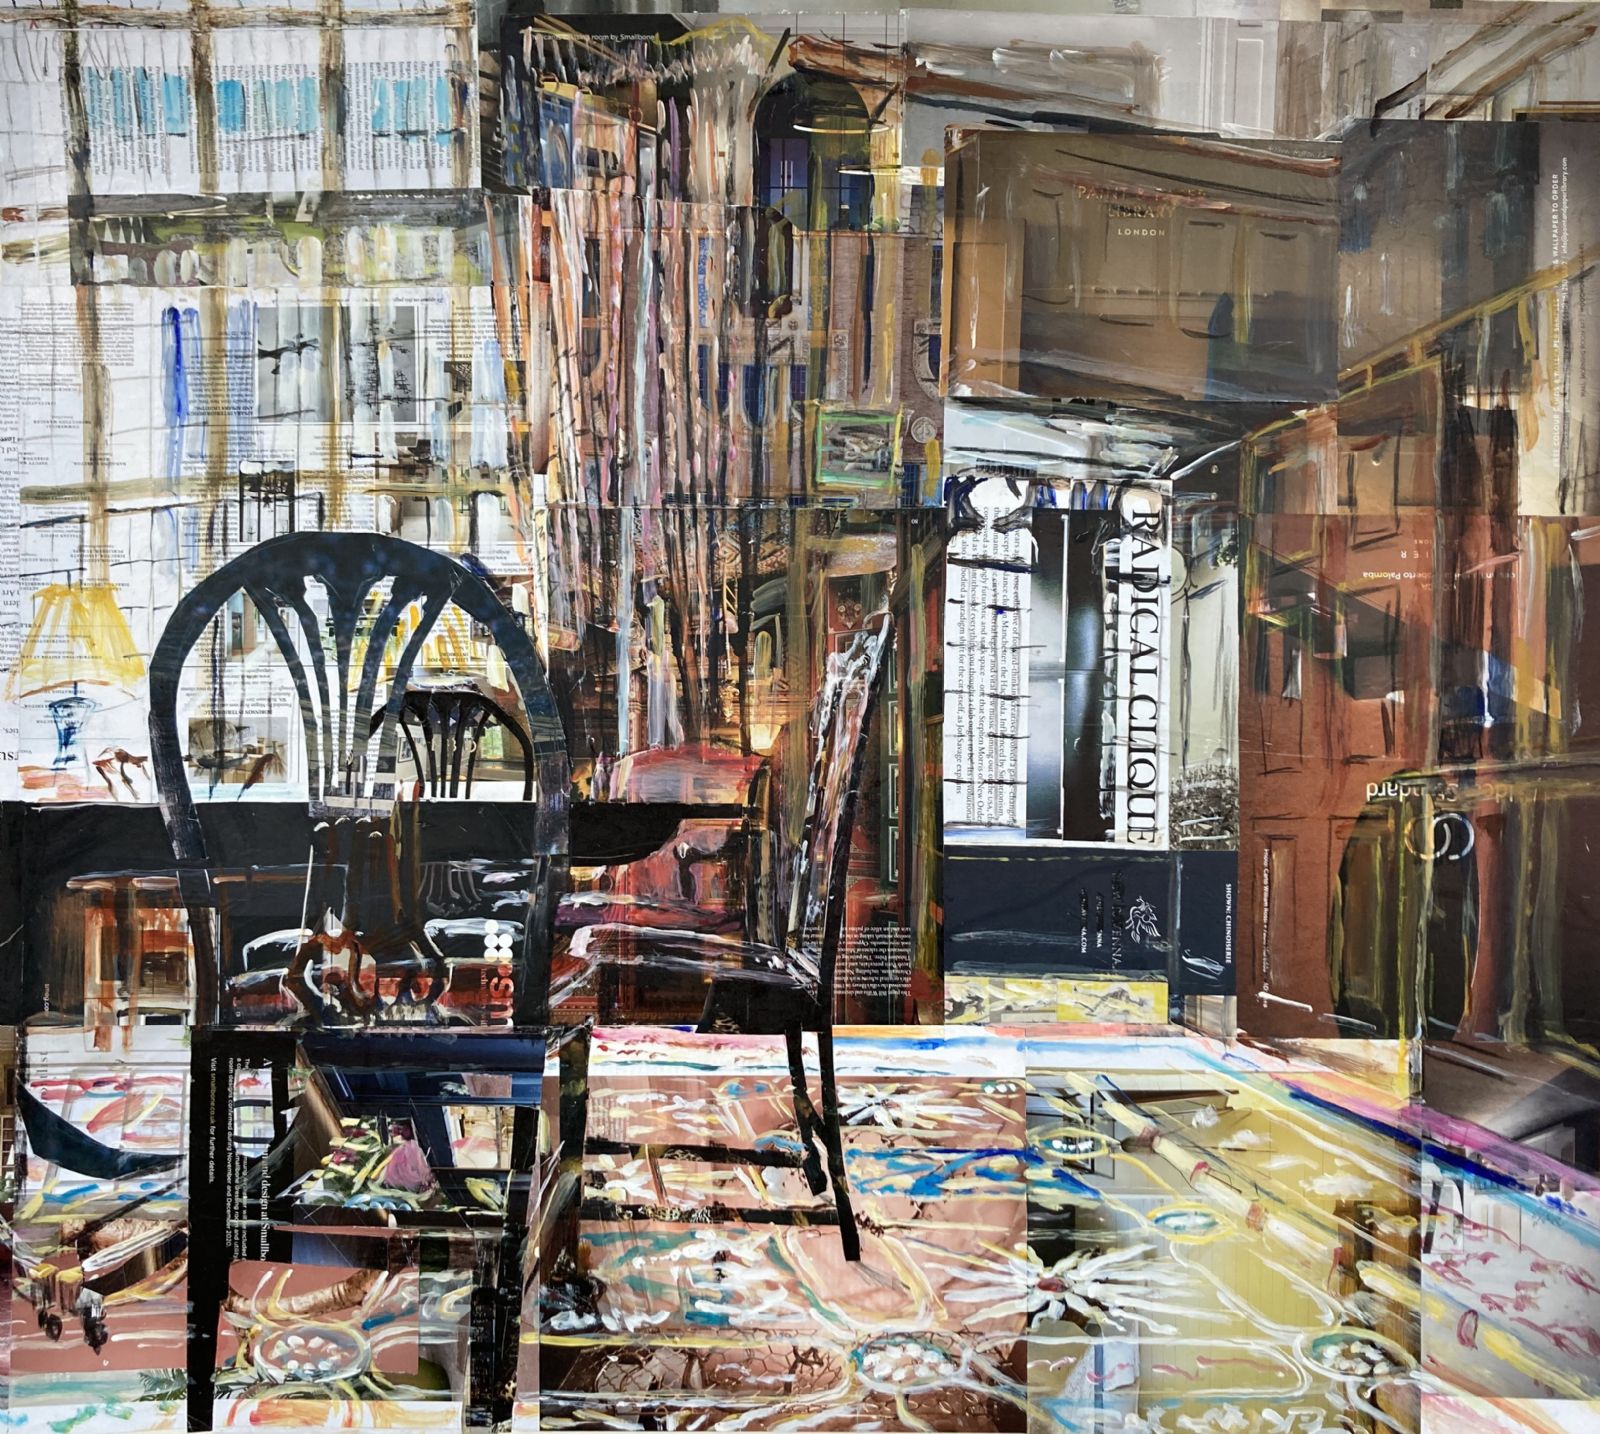 Merchant Taylor's Hall, Library (radical clique) by Alison Pullen